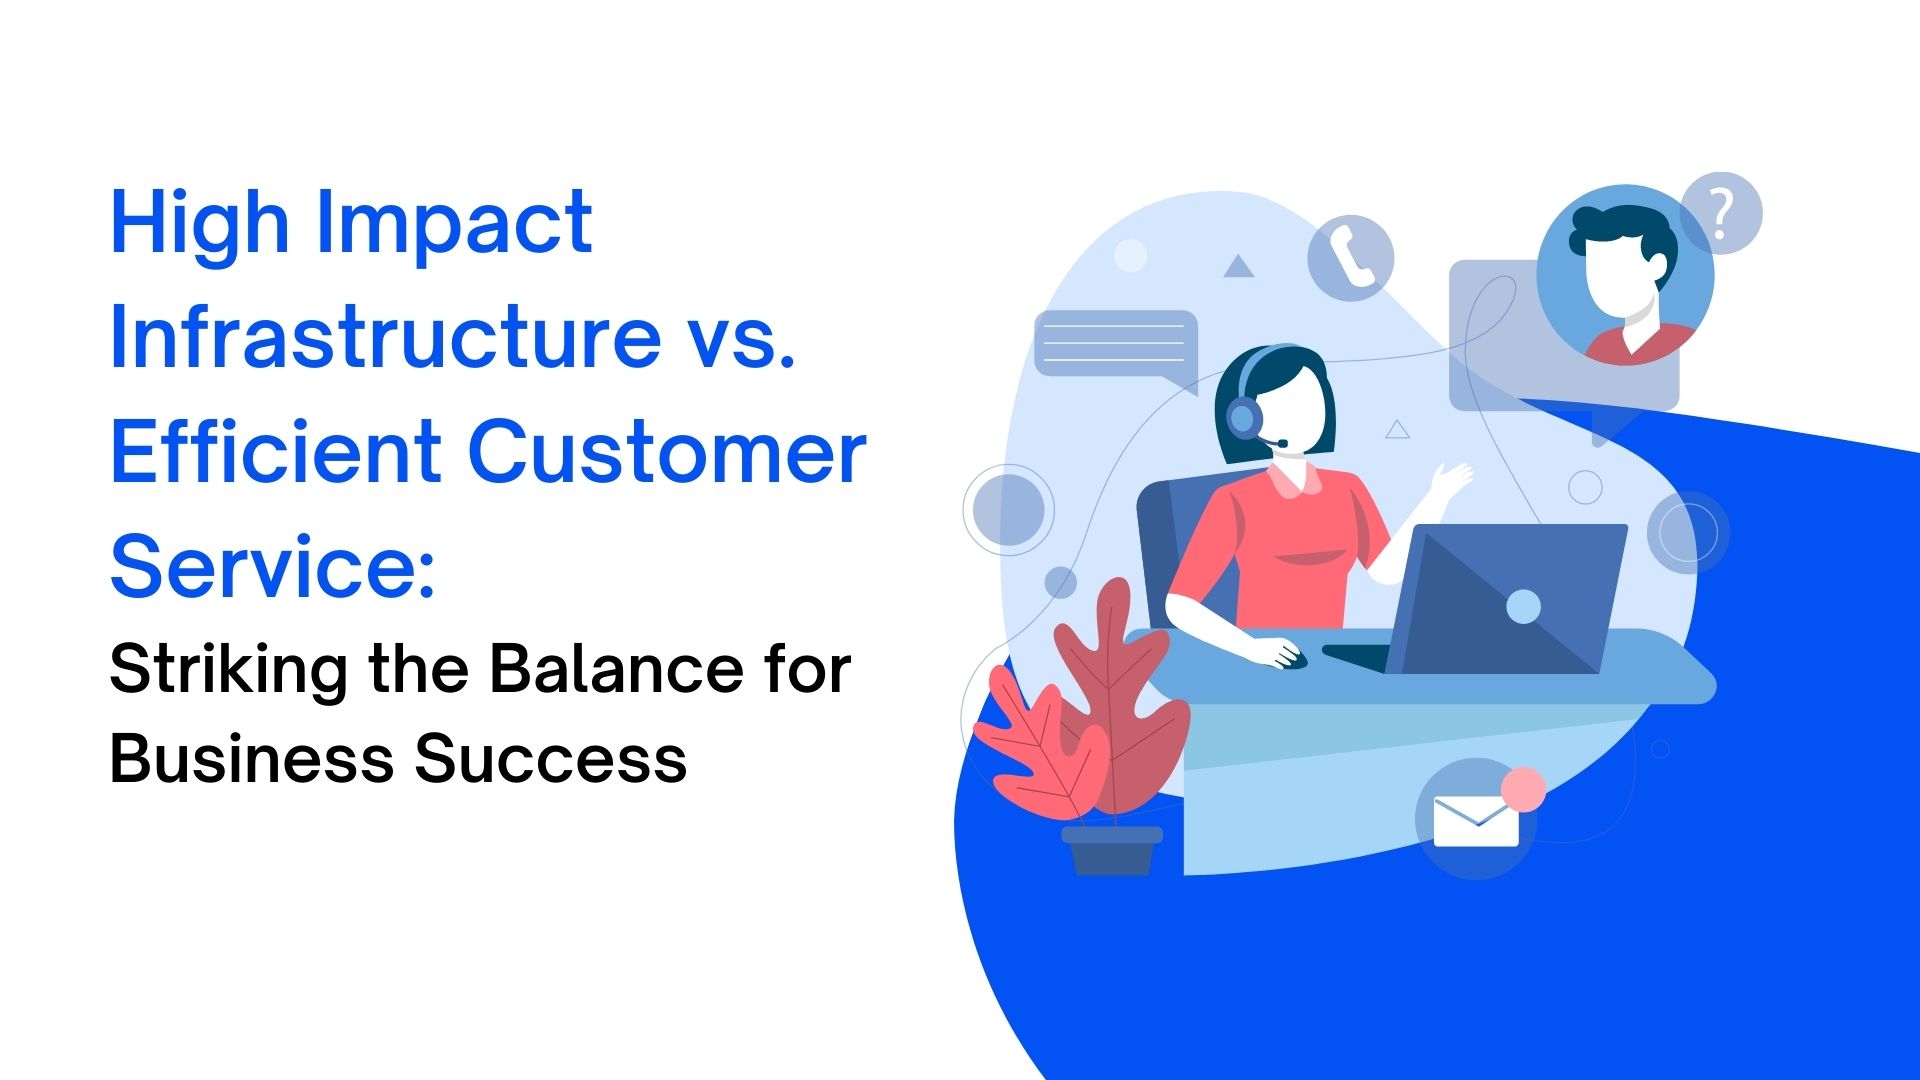 High Impact Infrastructure vs. Efficient Customer Service: Striking the Balance for Business Success